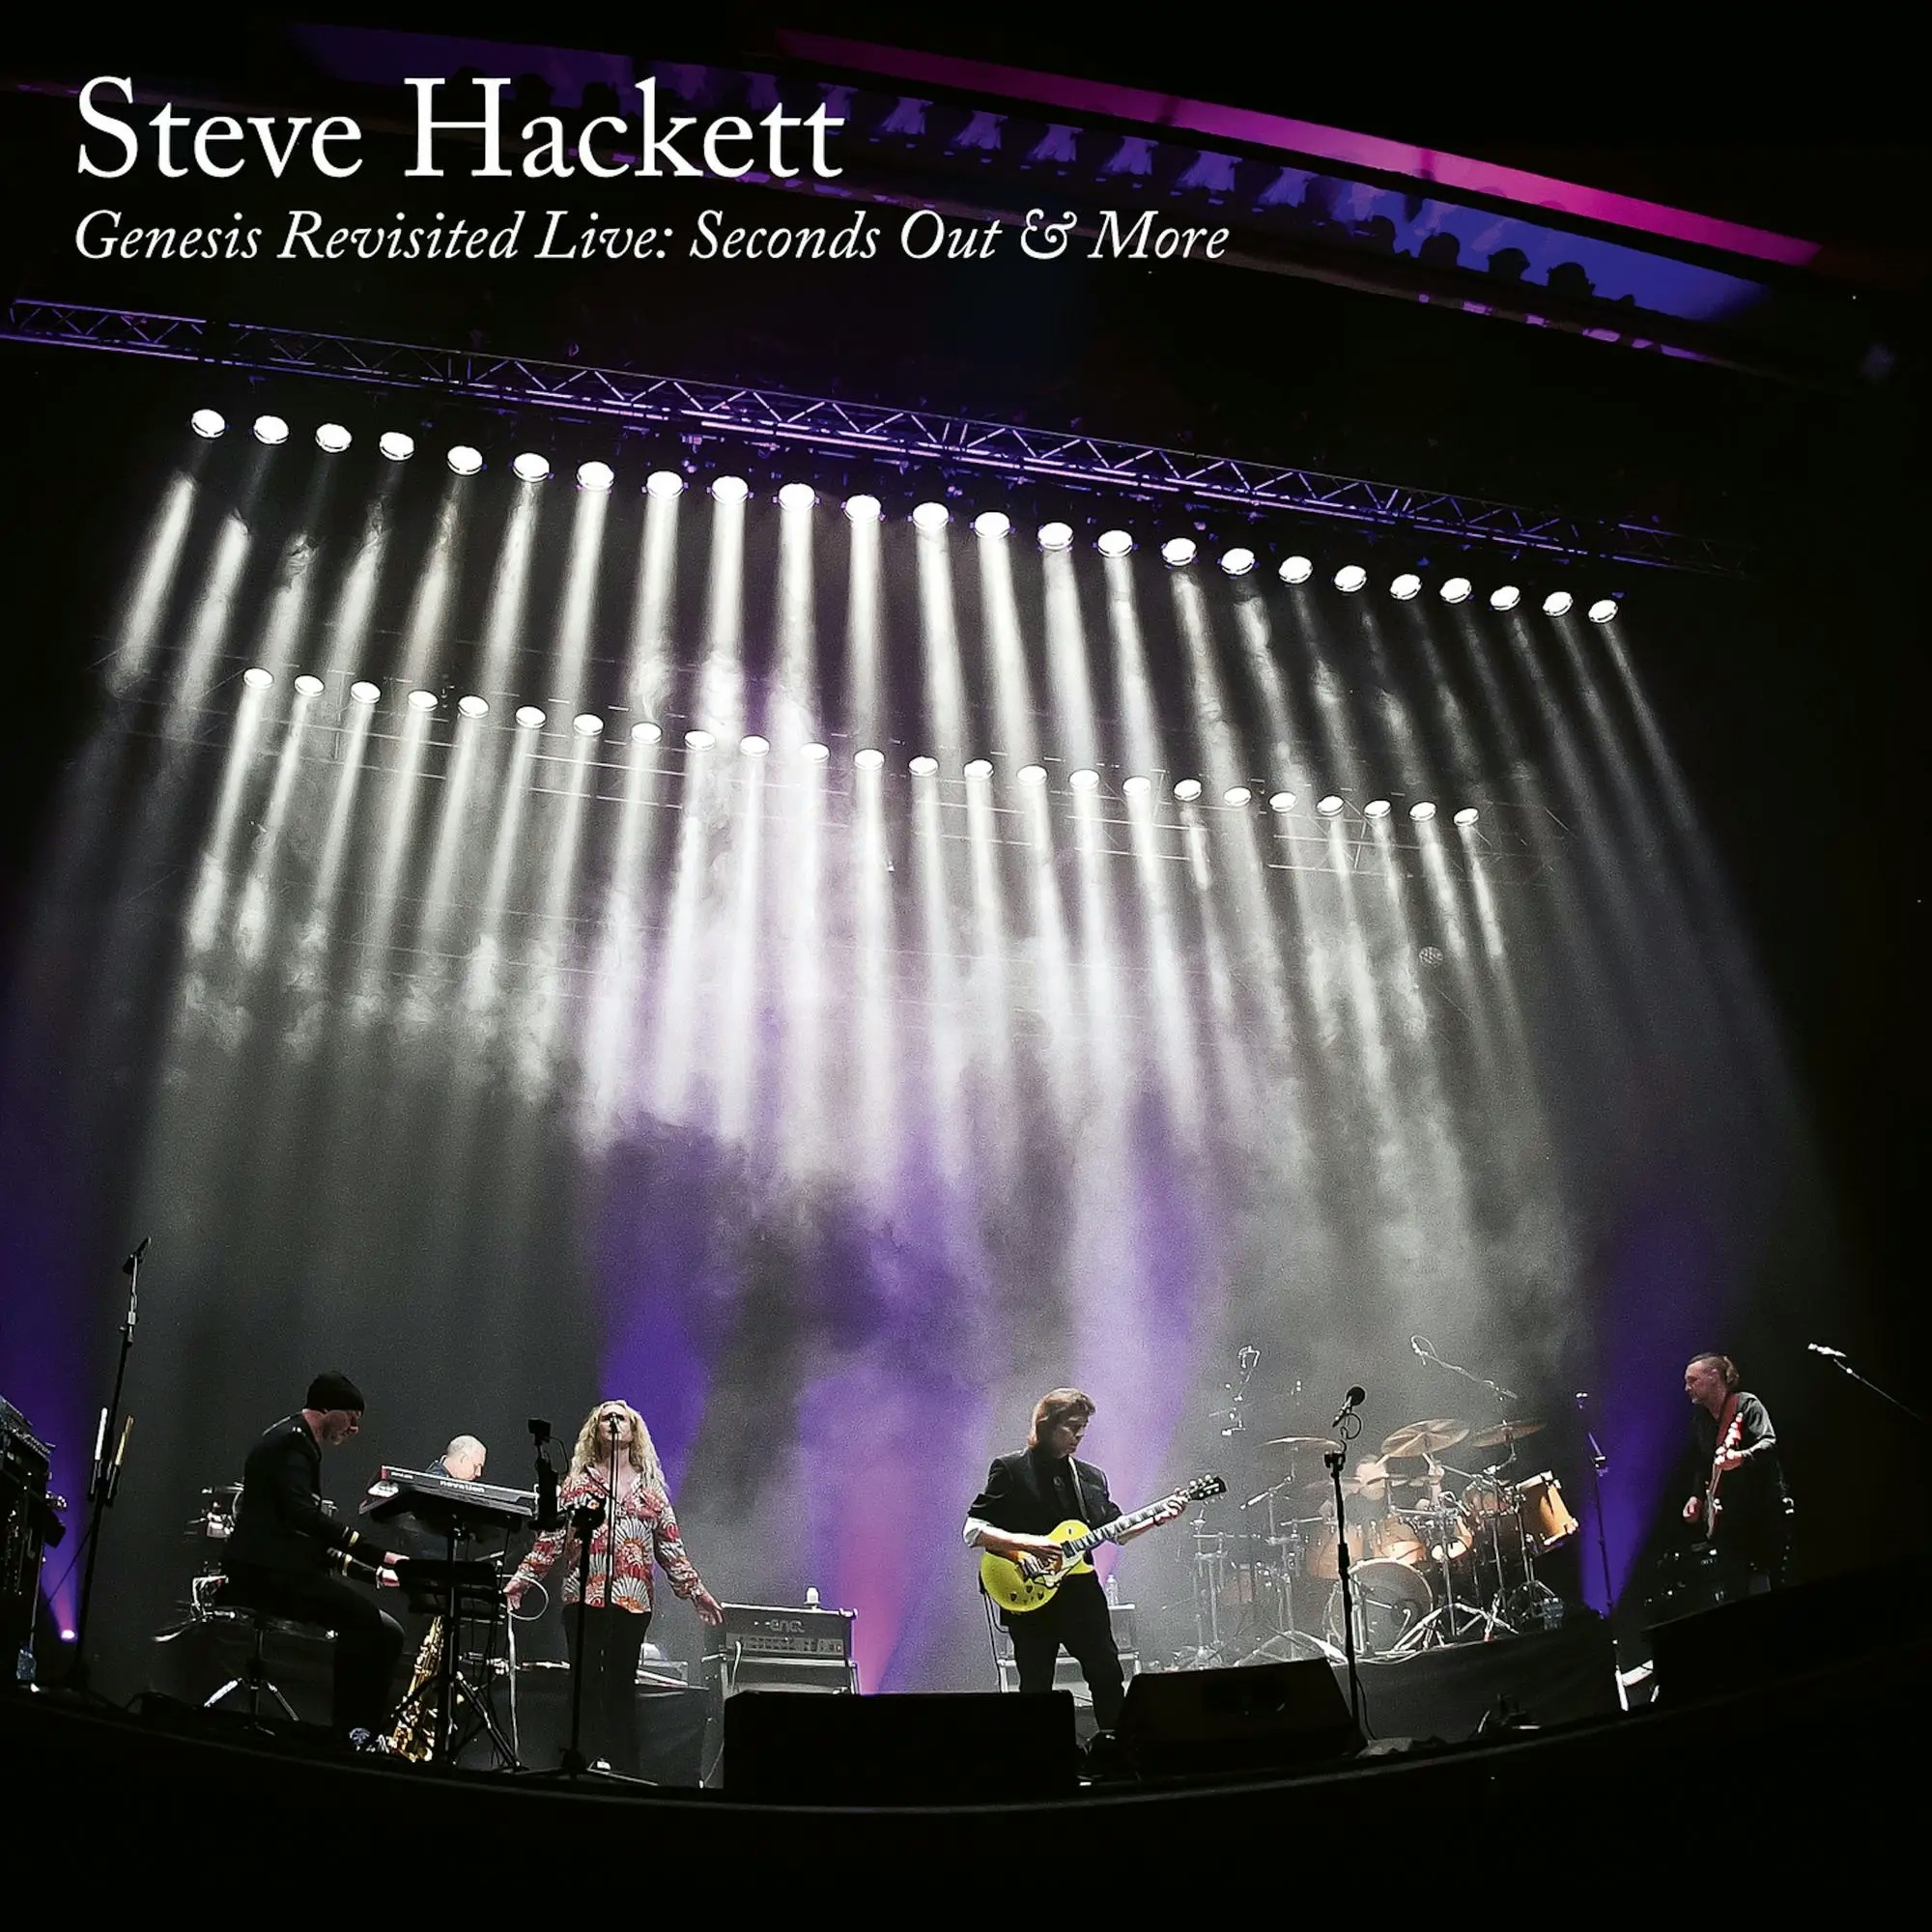 Album artwork for Genesis Revisited Live: Seconds Out and More by Steve Hackett